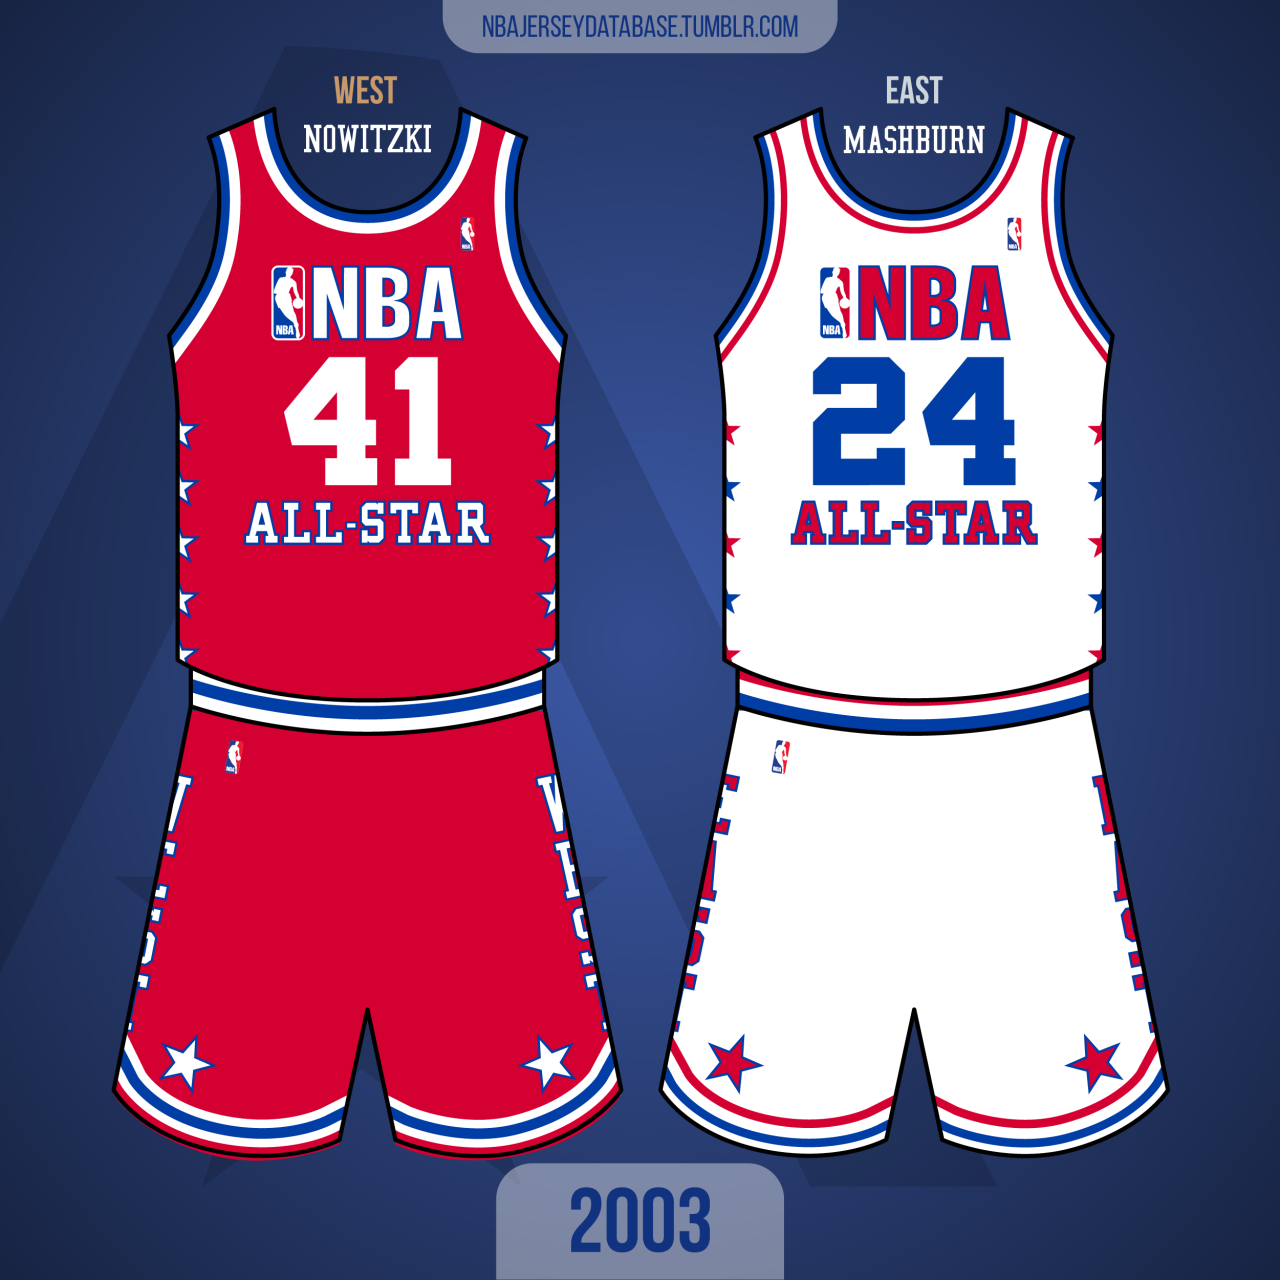 NBA Jersey Database, 2003 NBA All-Star Game Philips Arena East 145